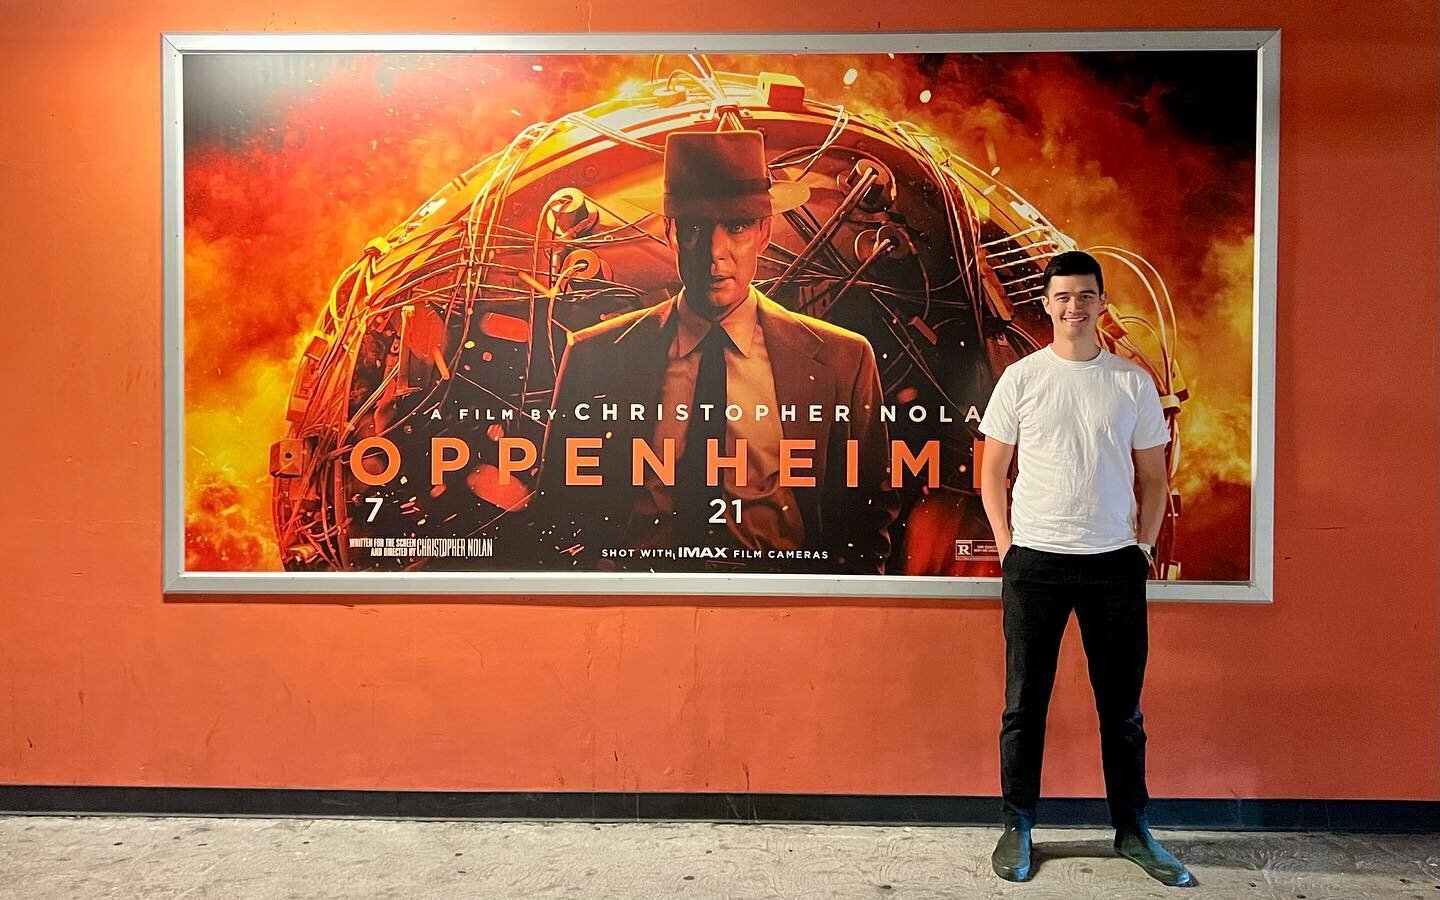 @oppenheimermovie! An incredible score by @ludwiggoransson. 🙌 So proud to have been a part of Team G&ouml;ransson with @nsamphel @monicasonand @felpach @noah_gorelick @_chris_fogel_ @colby_wolby @finelinemusicservice